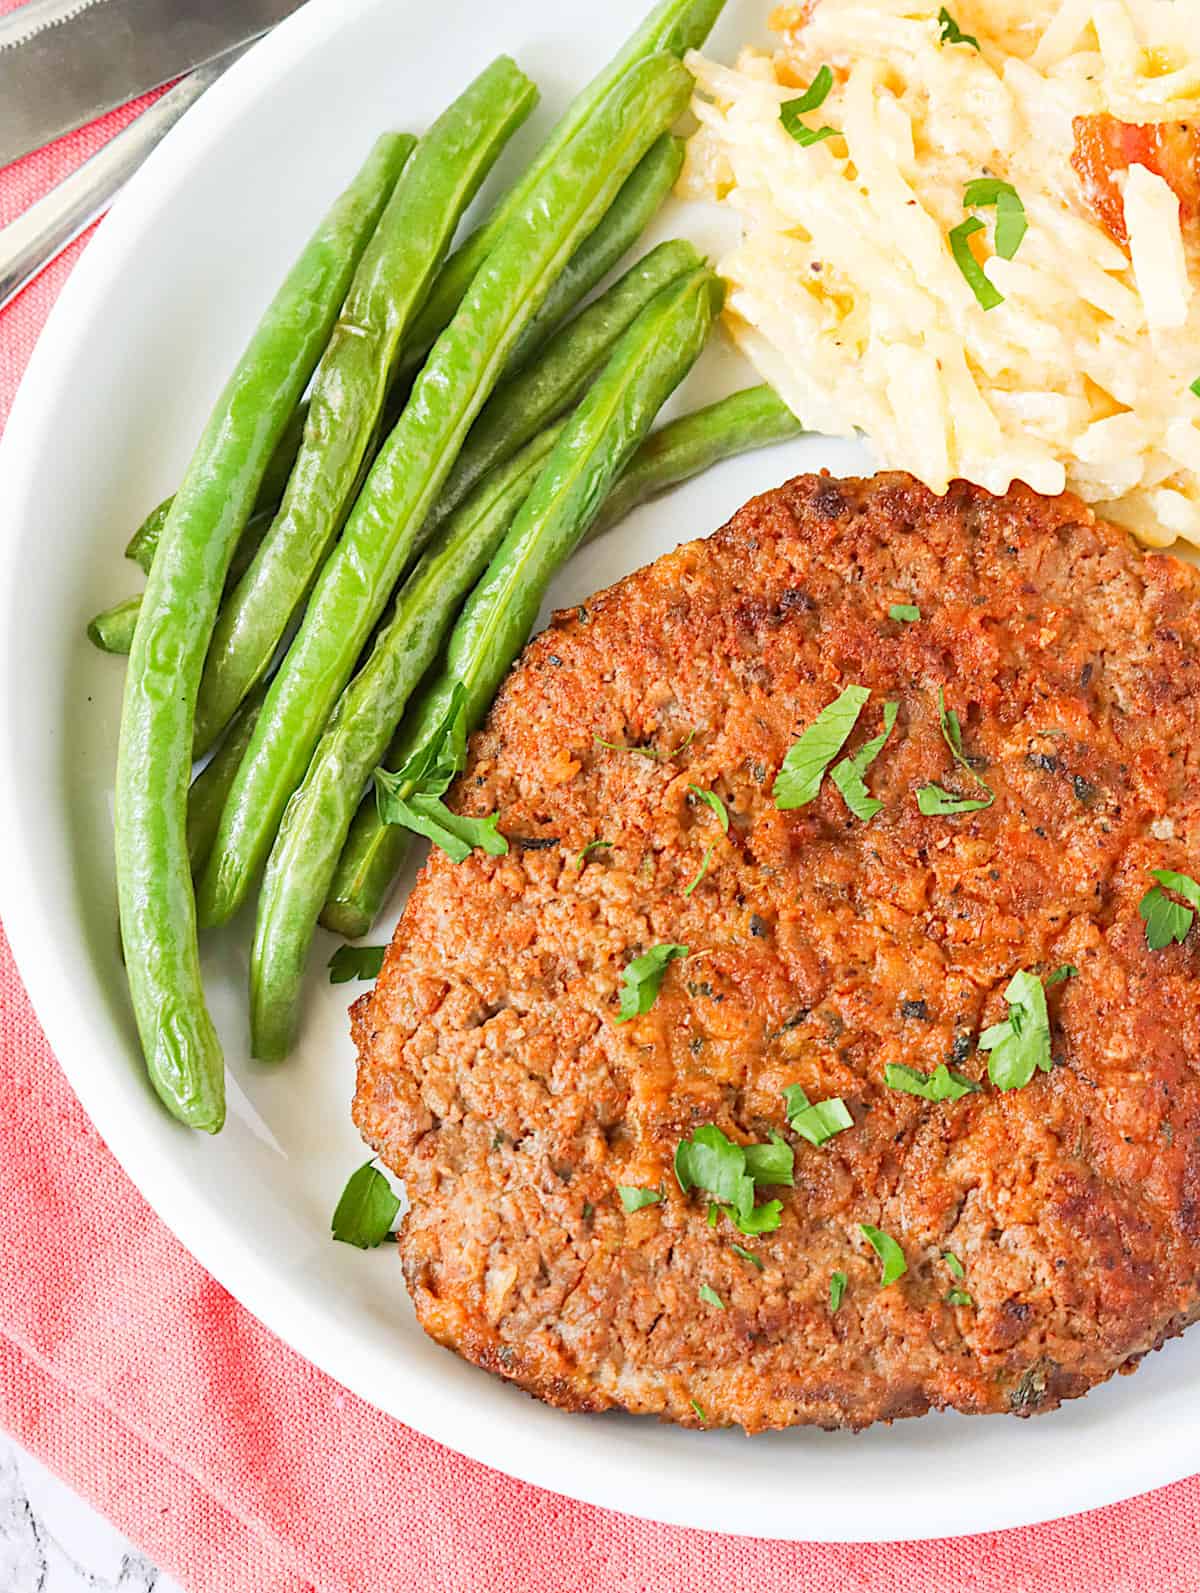 Tender, juicy chicken fried steak for the family